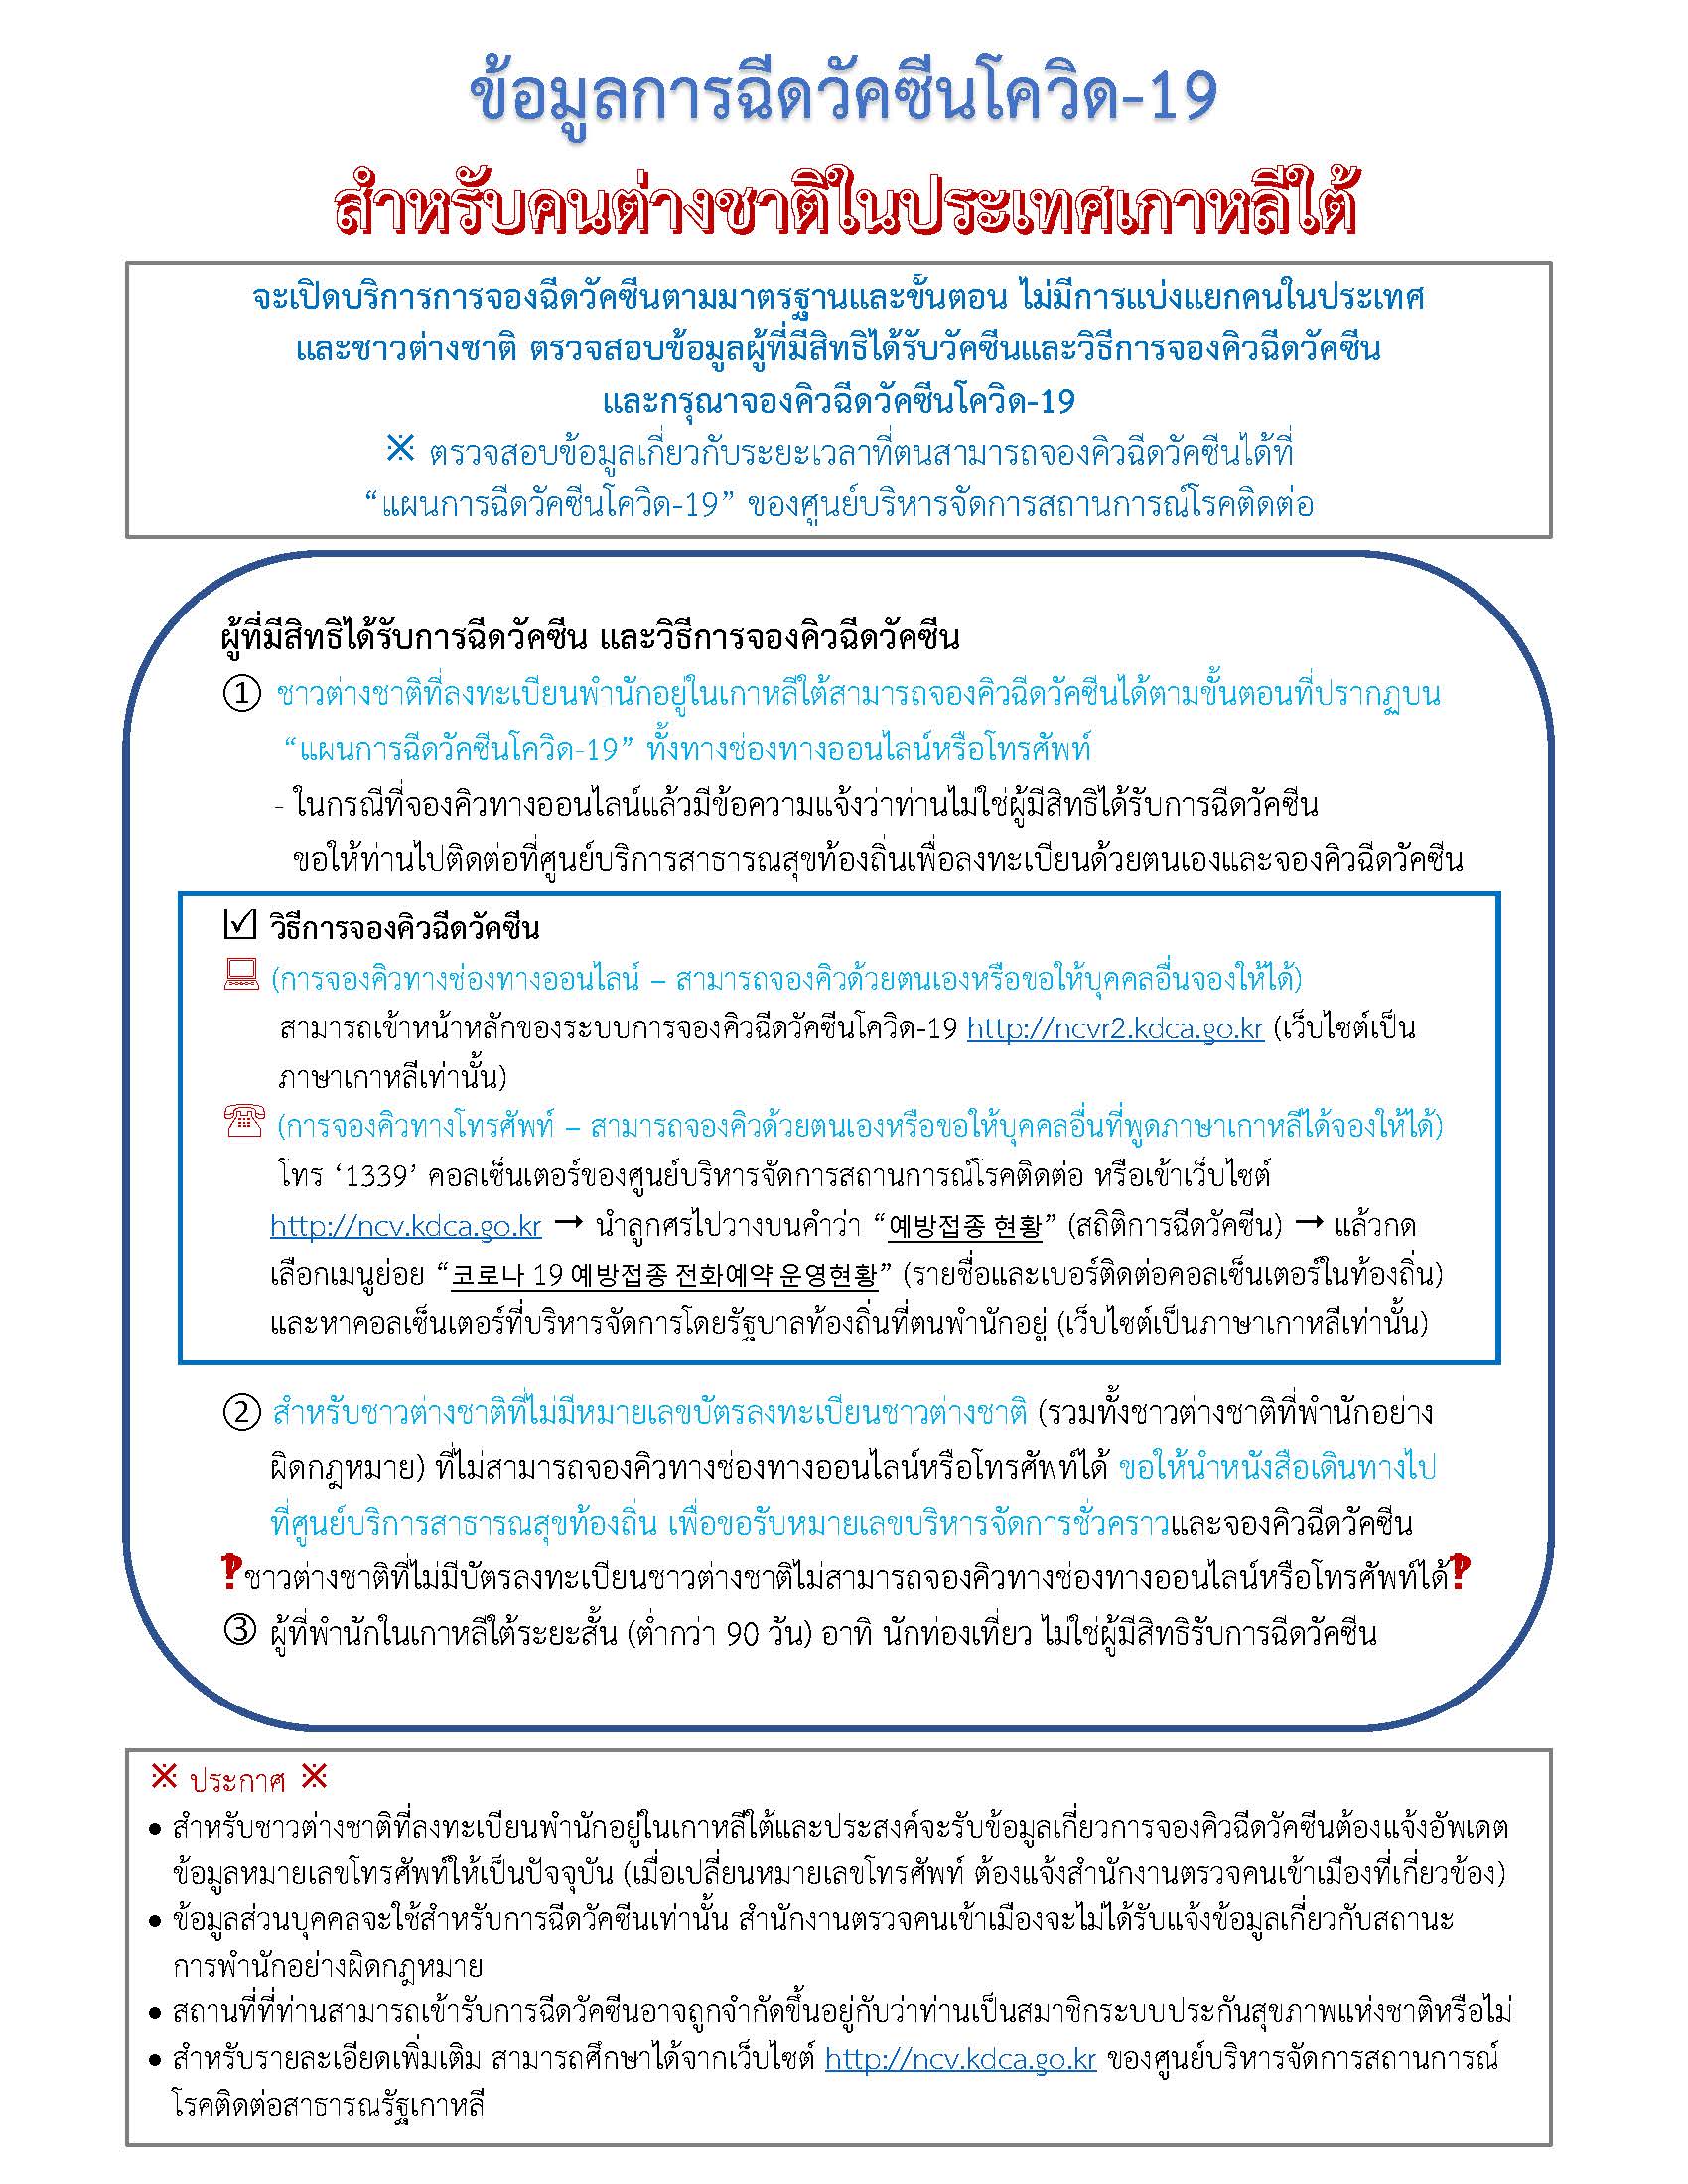 Foreigners_Vaccination_Info_2021.8.31